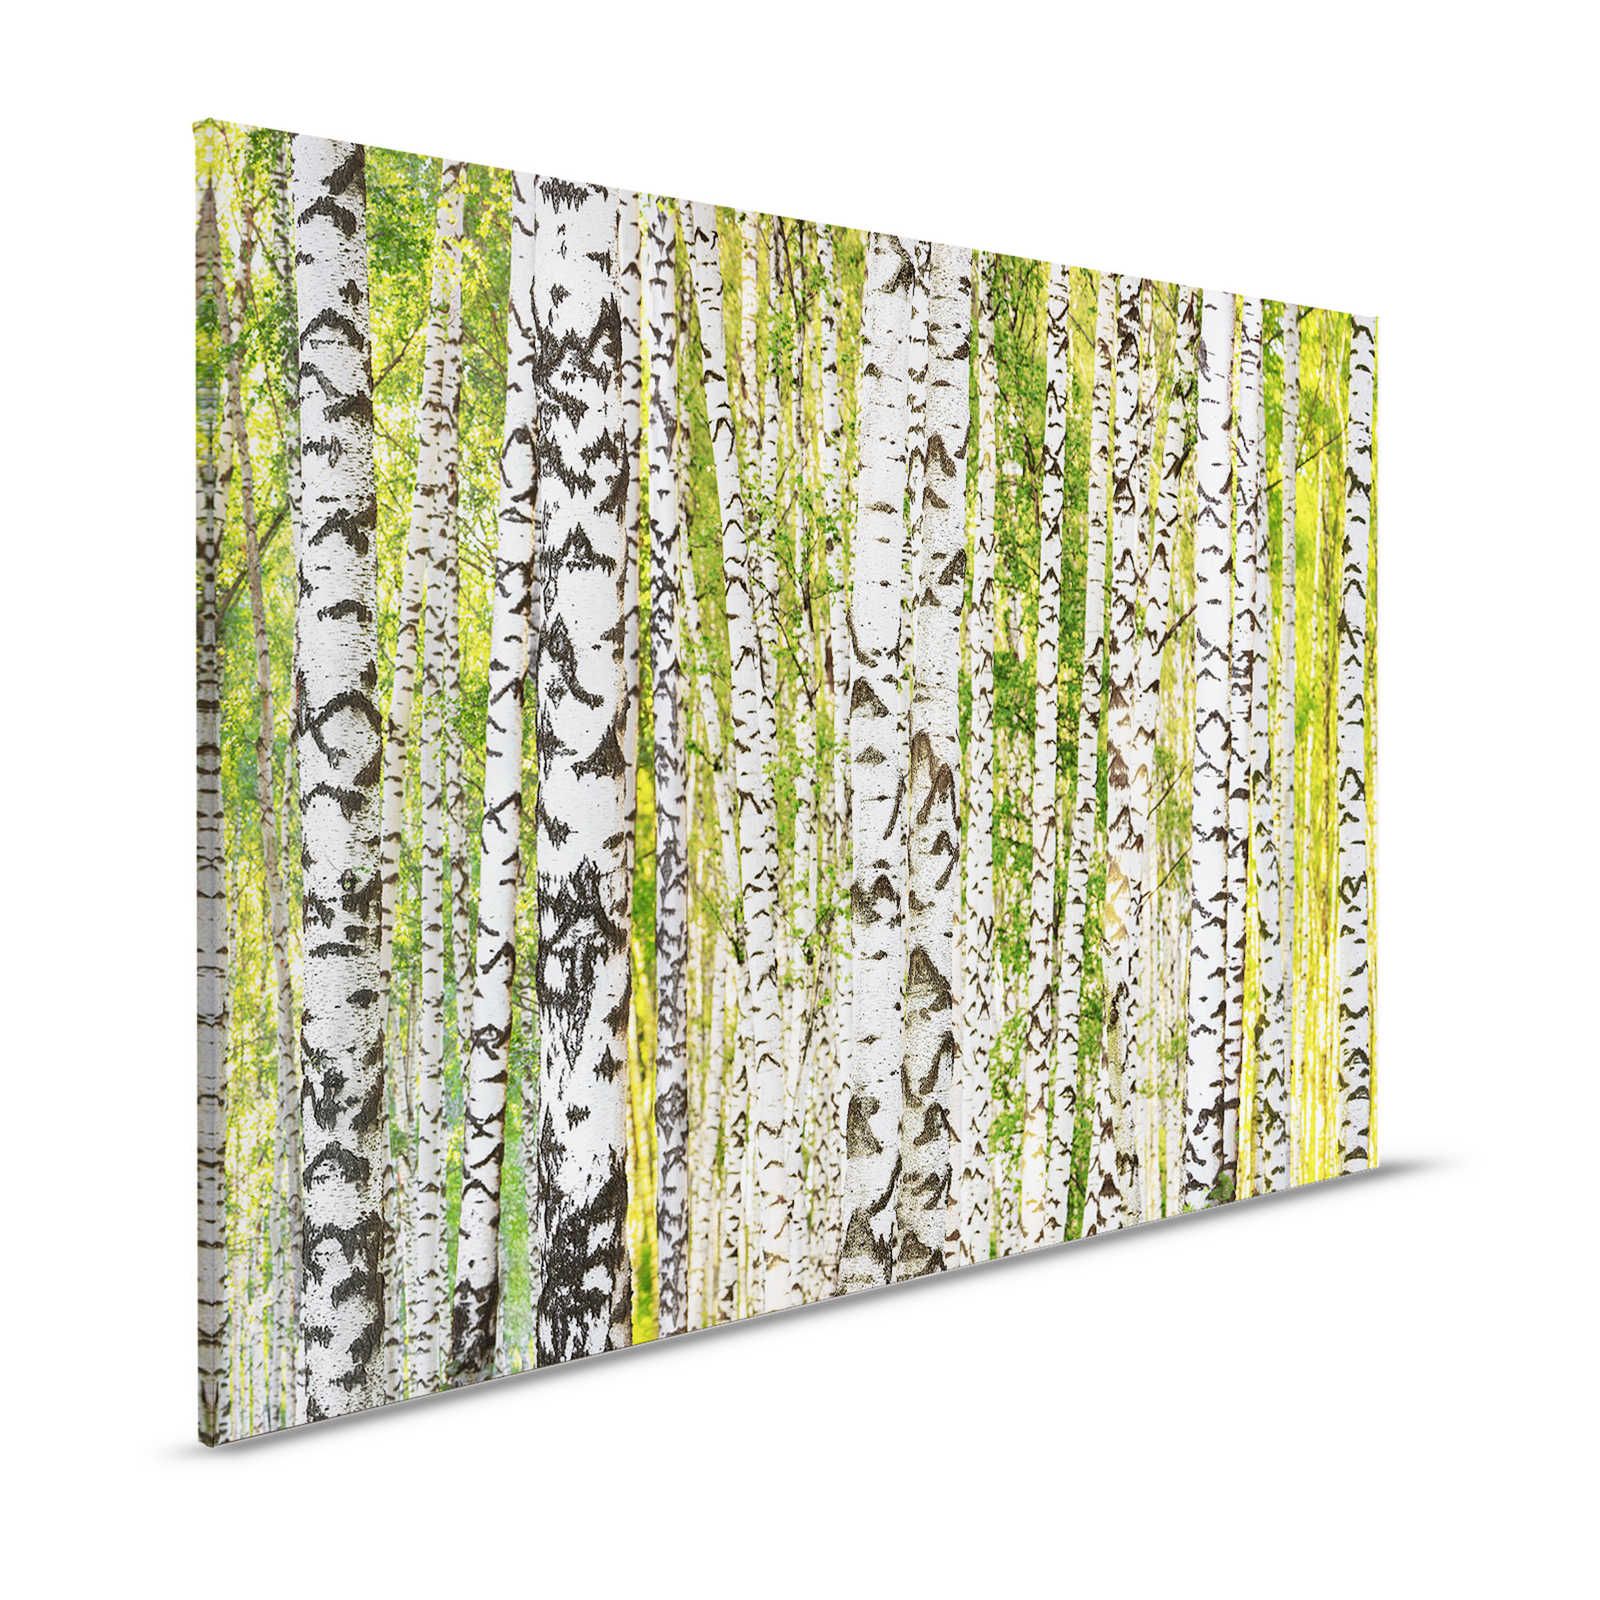 Birch Forest Canvas Painting Tree Trunk Motif - 1.20 m x 0.80 m
